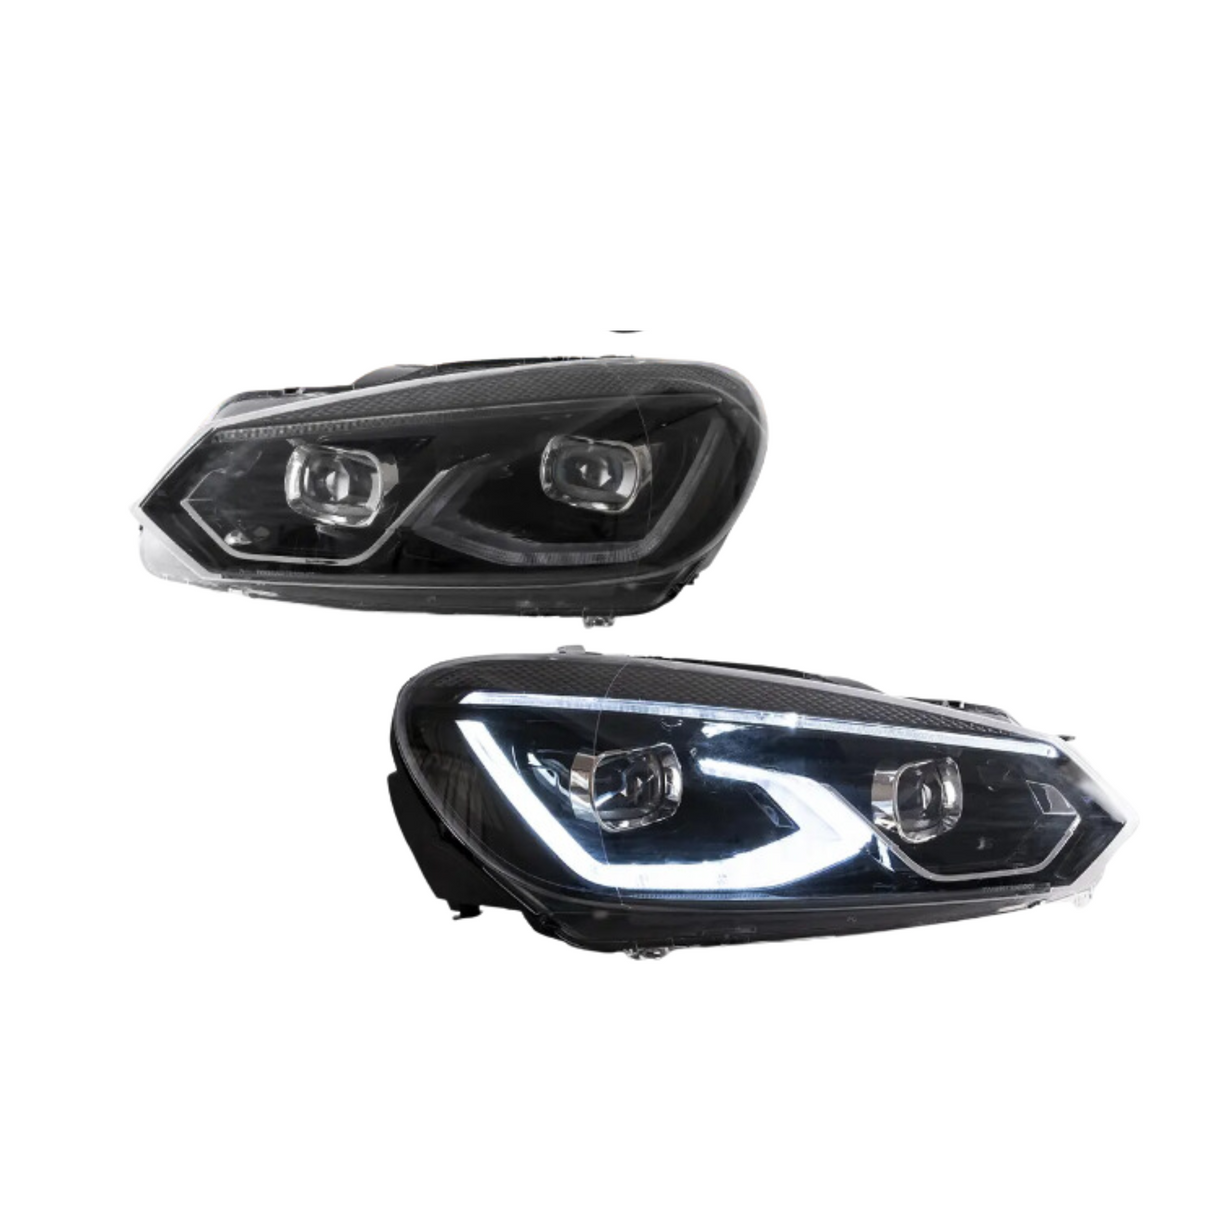 Golf - MK6: LED Sequential Front Headlights 10-12